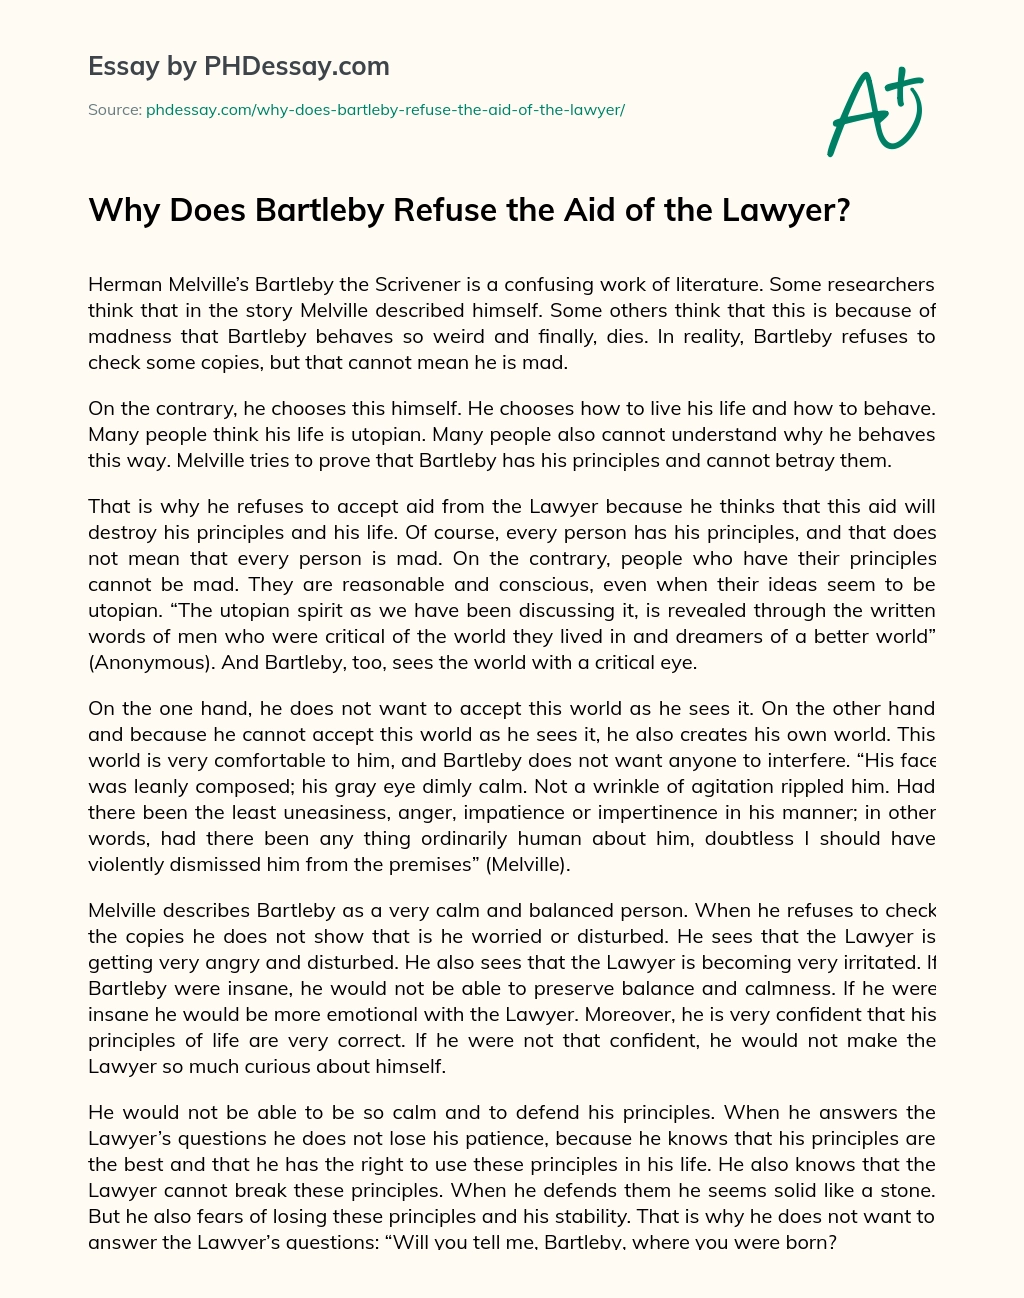 Why Does Bartleby Refuse the Aid of the Lawyer? essay